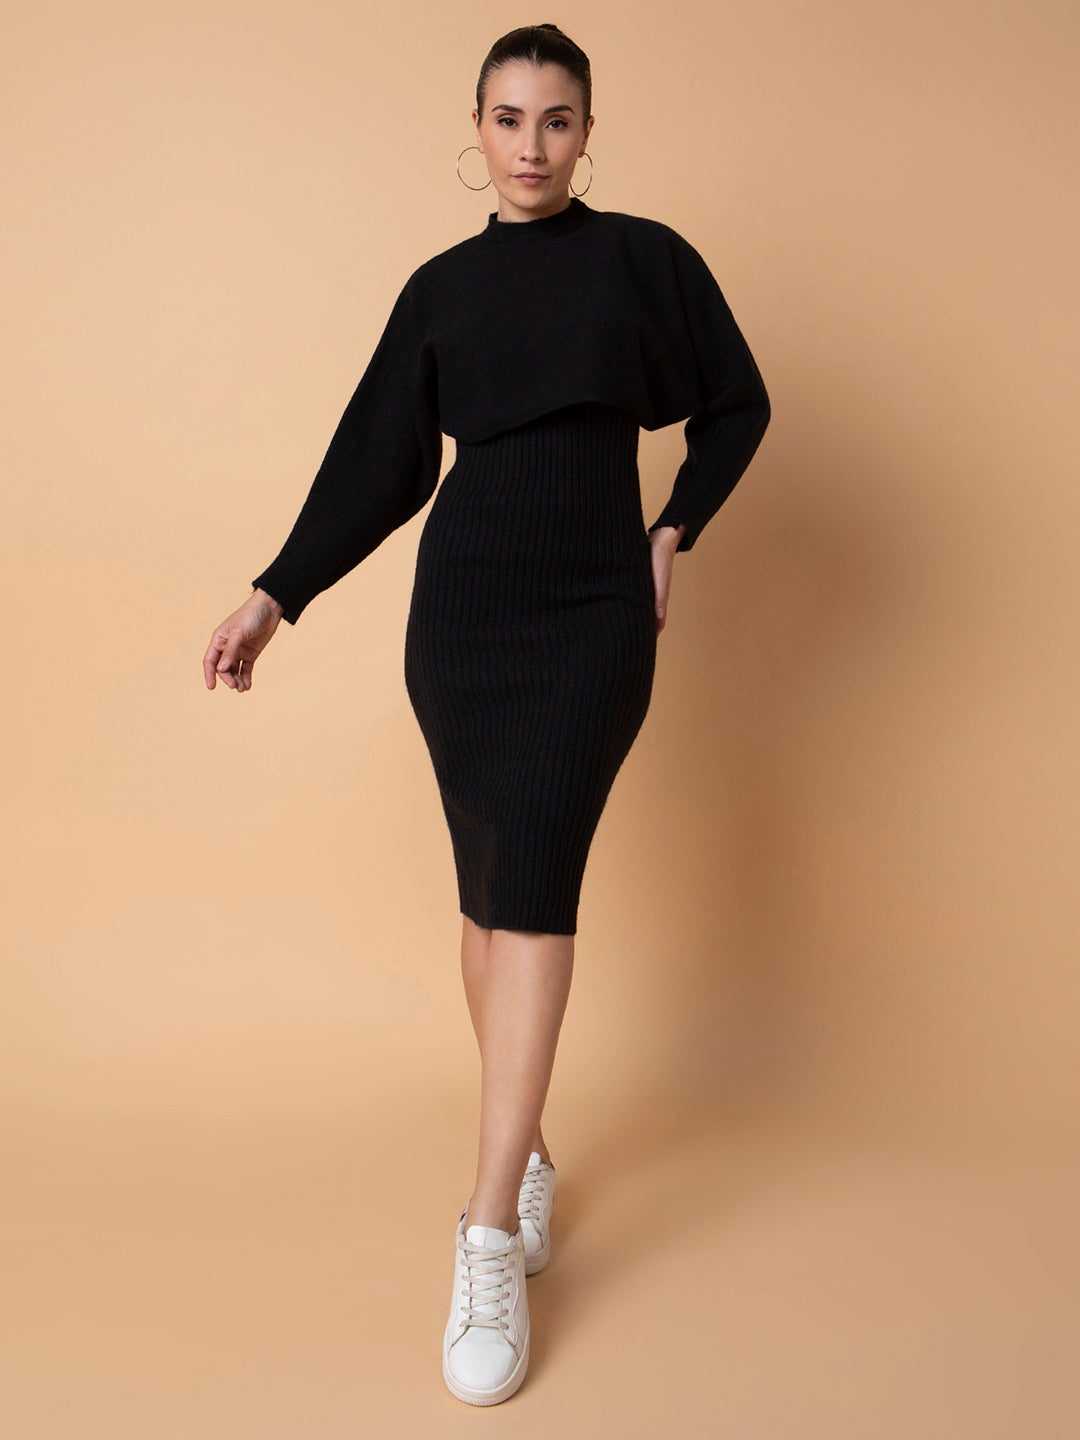 Women Solid Black Bodycon Dress with Top